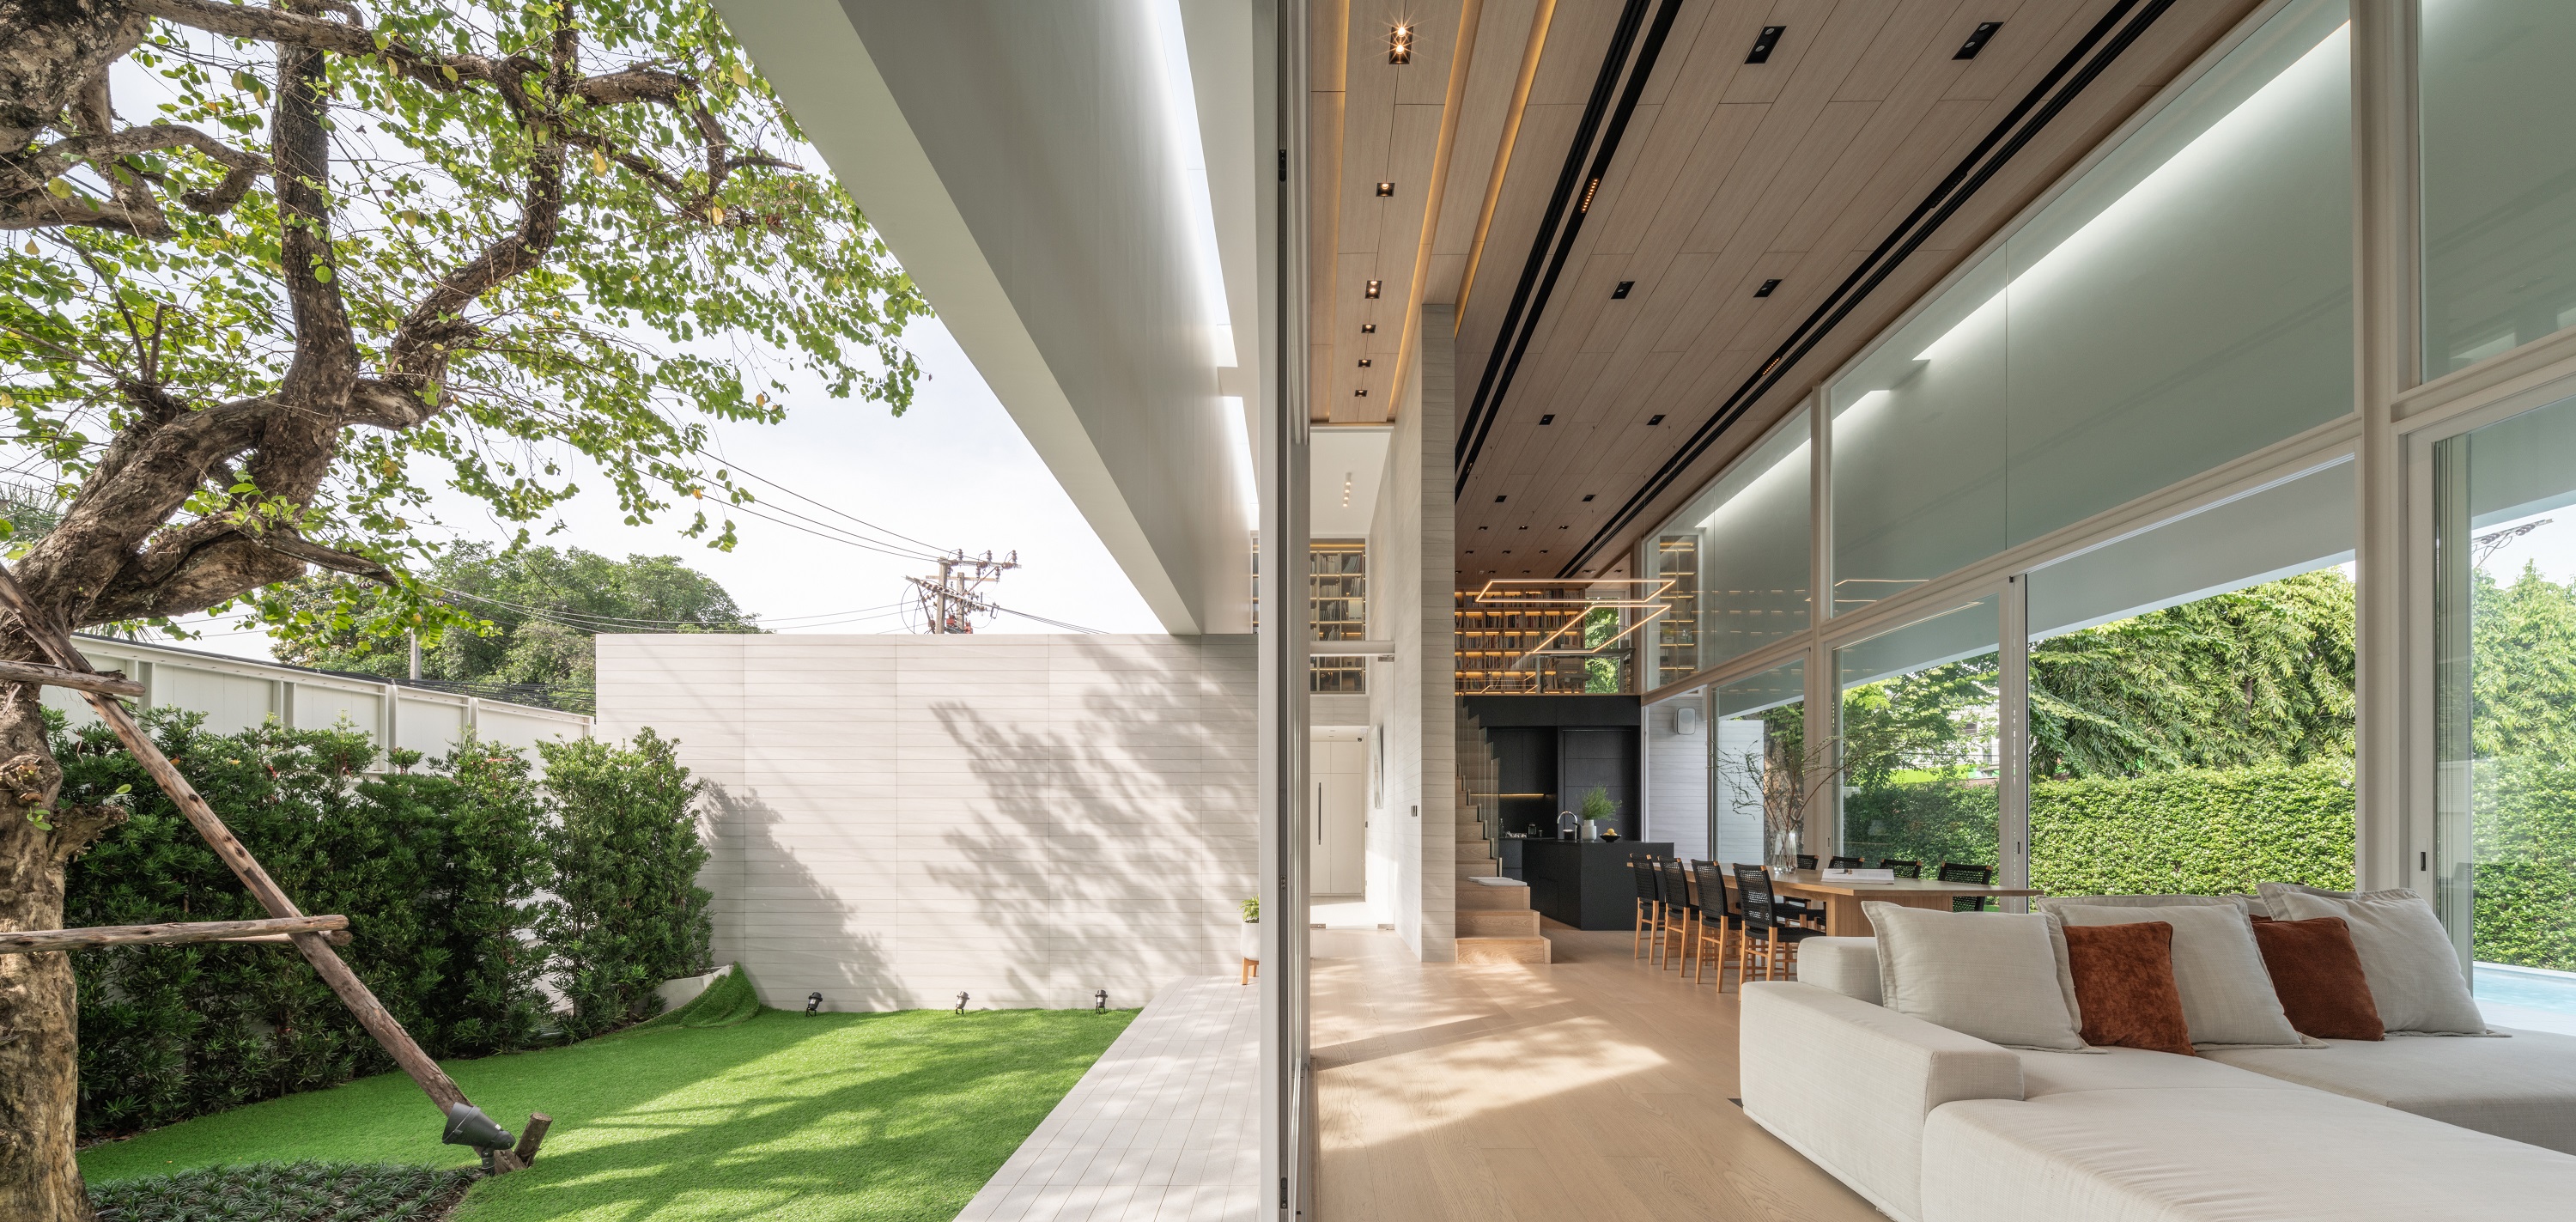 Courtyard and interior area view of TJ House, Photo by SkyGround architectural film & photography